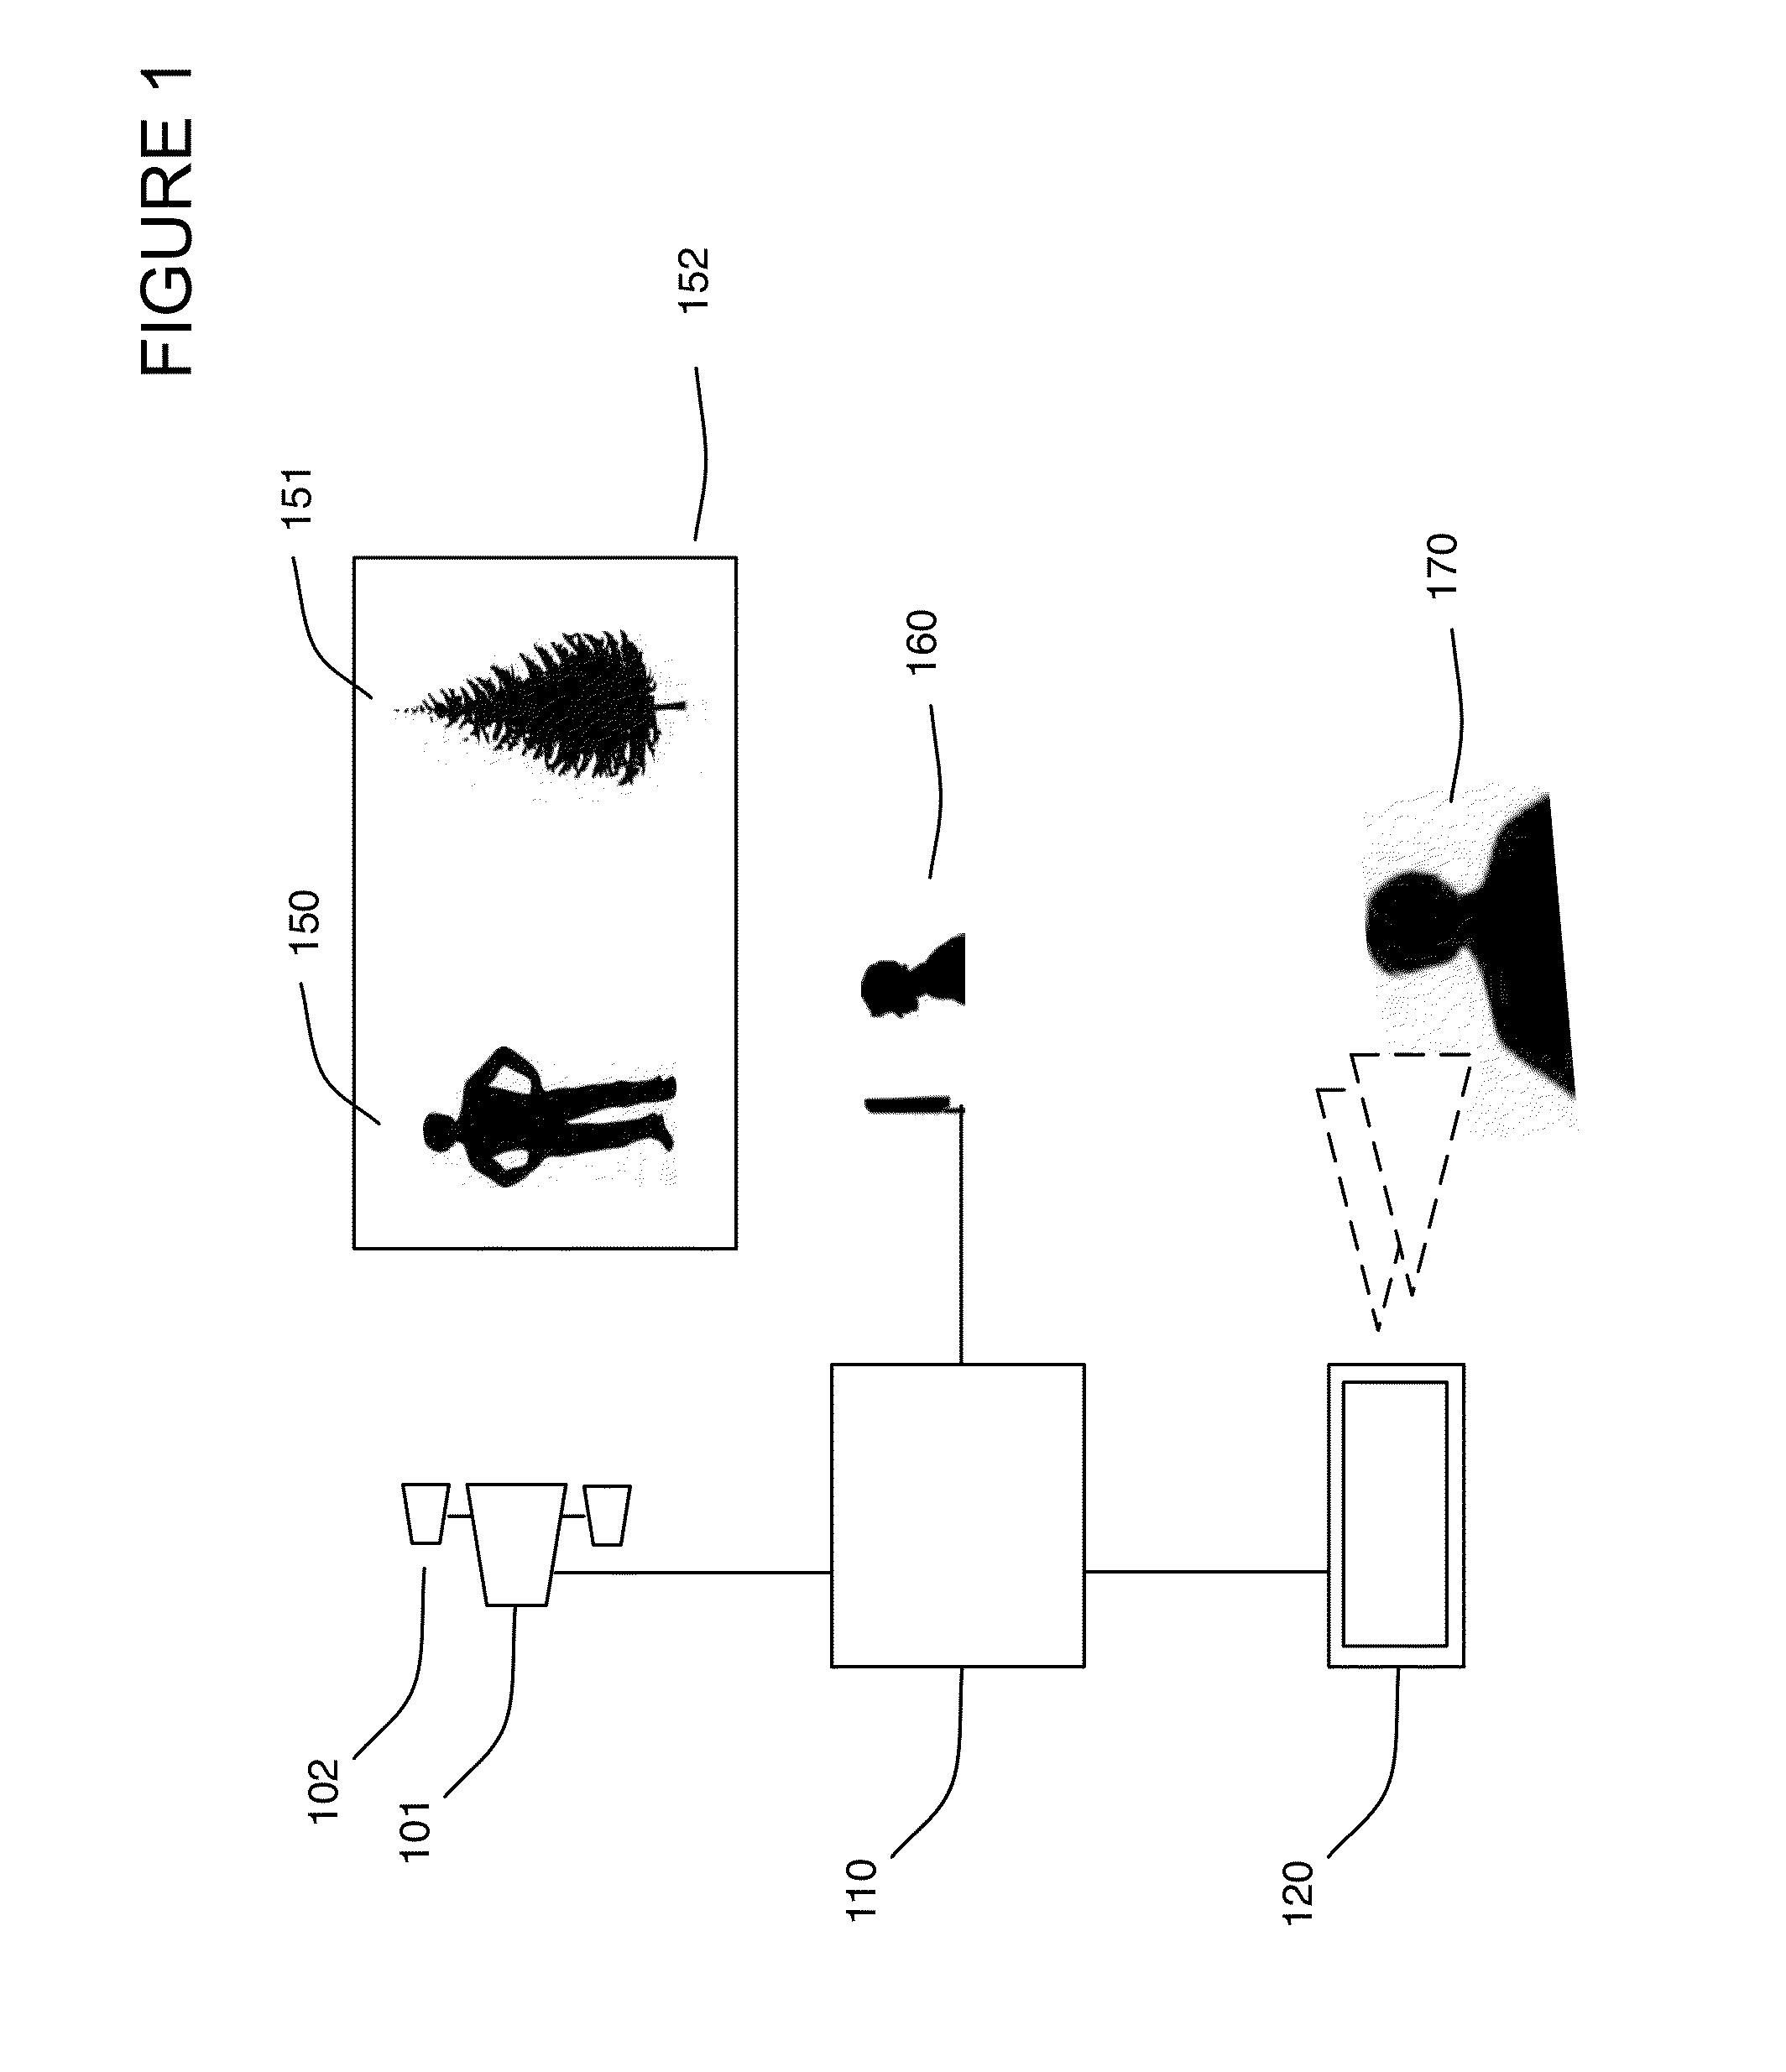 External depth map transformation method for conversion of two-dimensional images to stereoscopic images